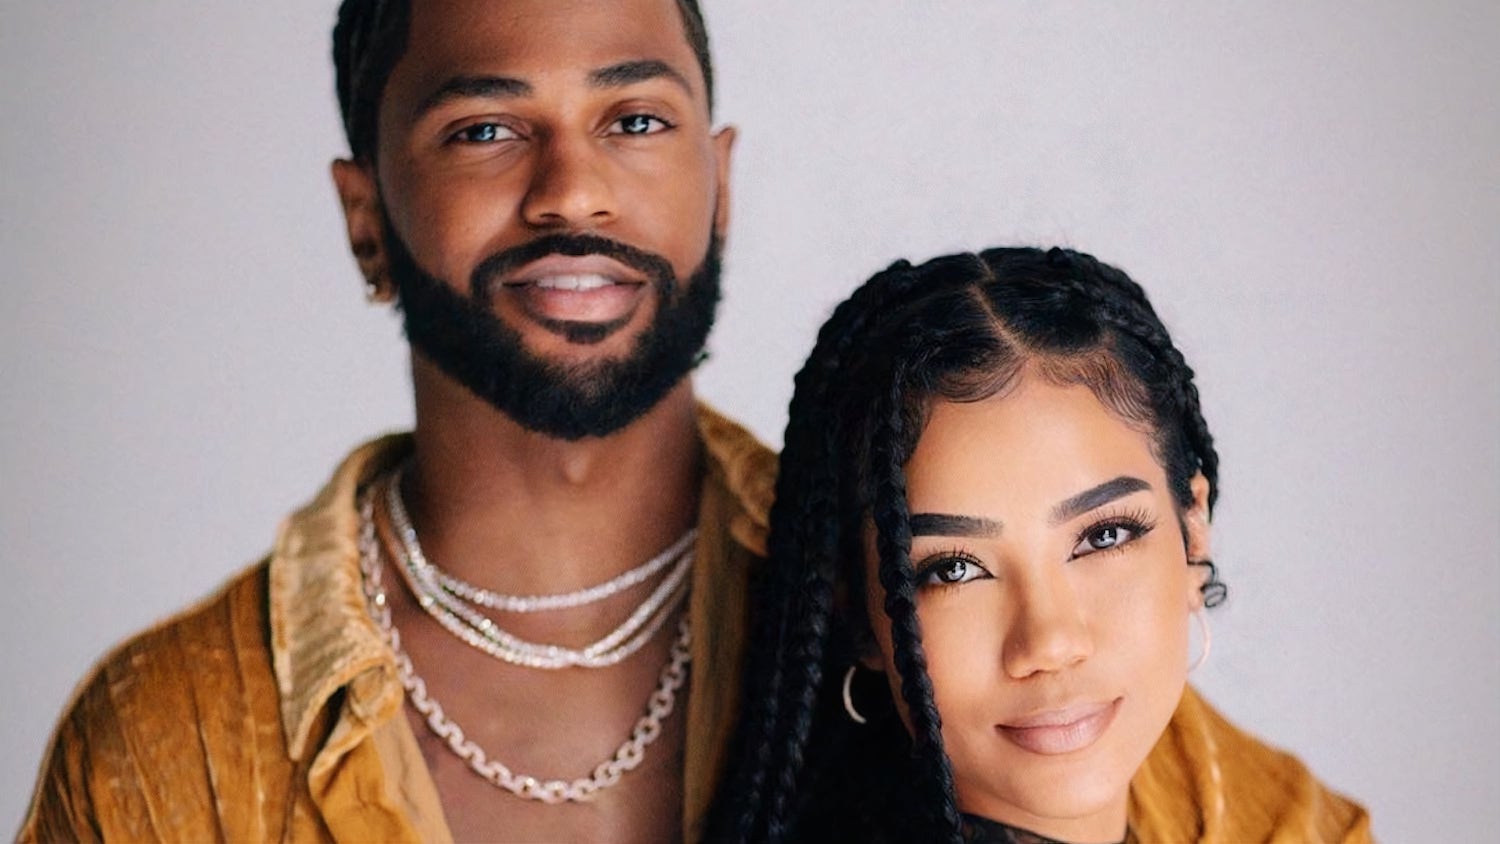 Big Sean and Jhené Aiko Reveal They’re Expecting A Baby Boy